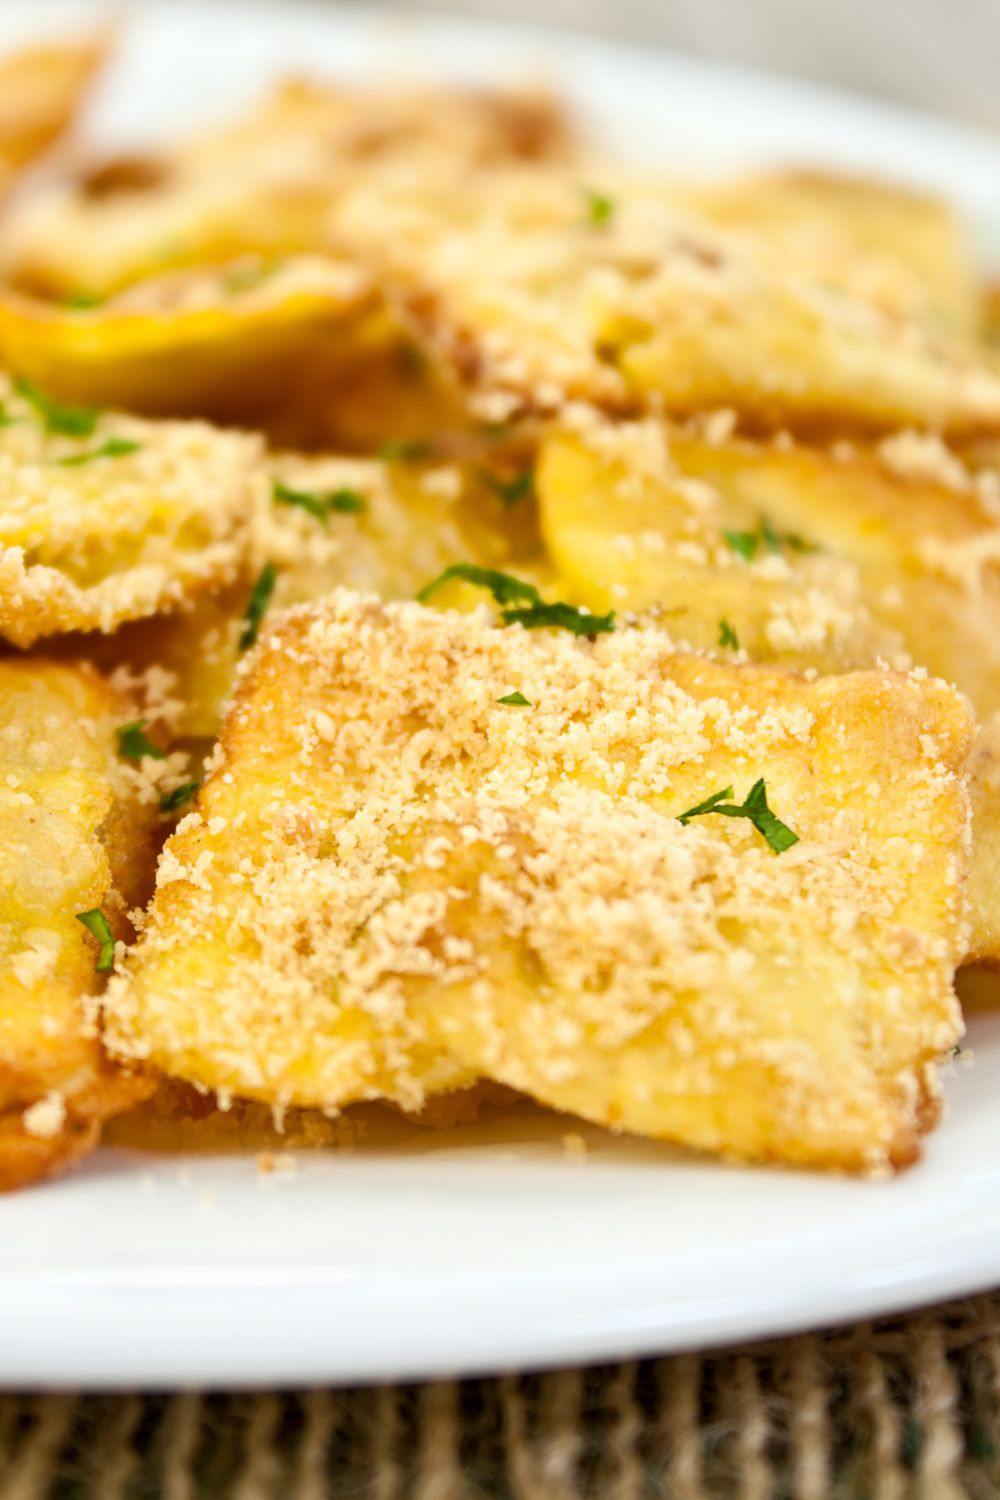 Golden fried ravioli sprinkled with parmesan cheese on a white plate